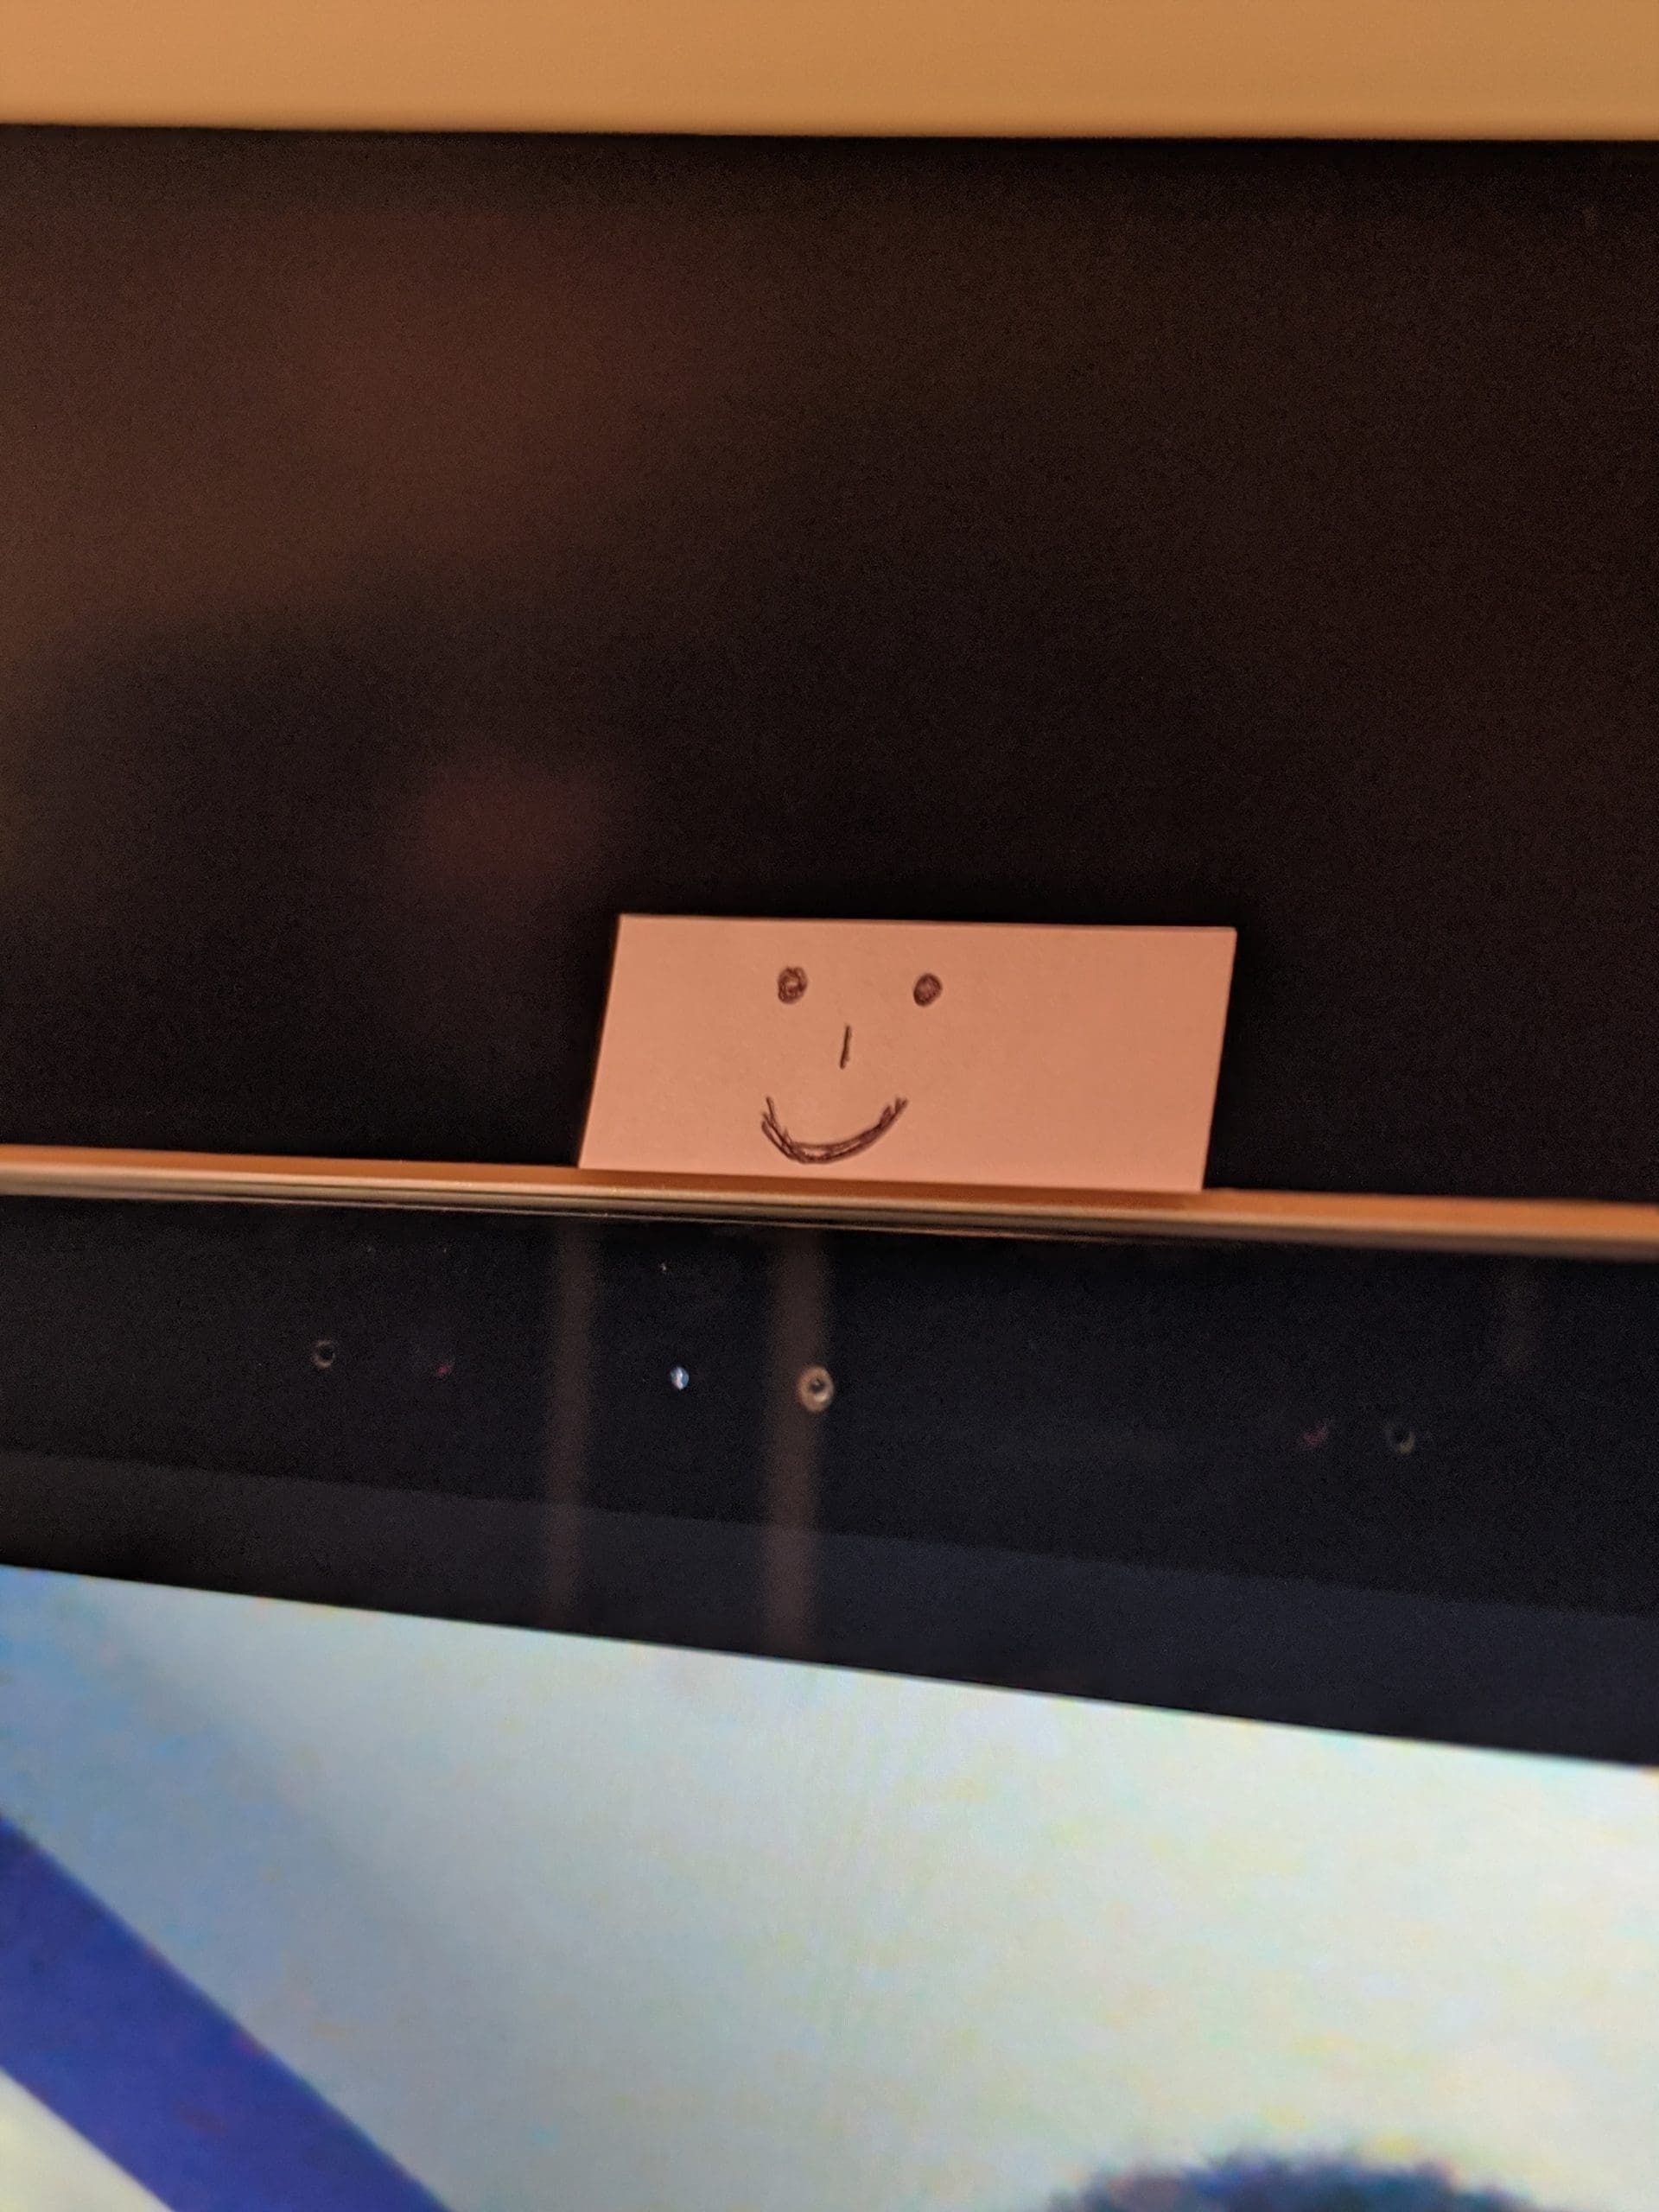 Smiley Face Post It Above Webcam